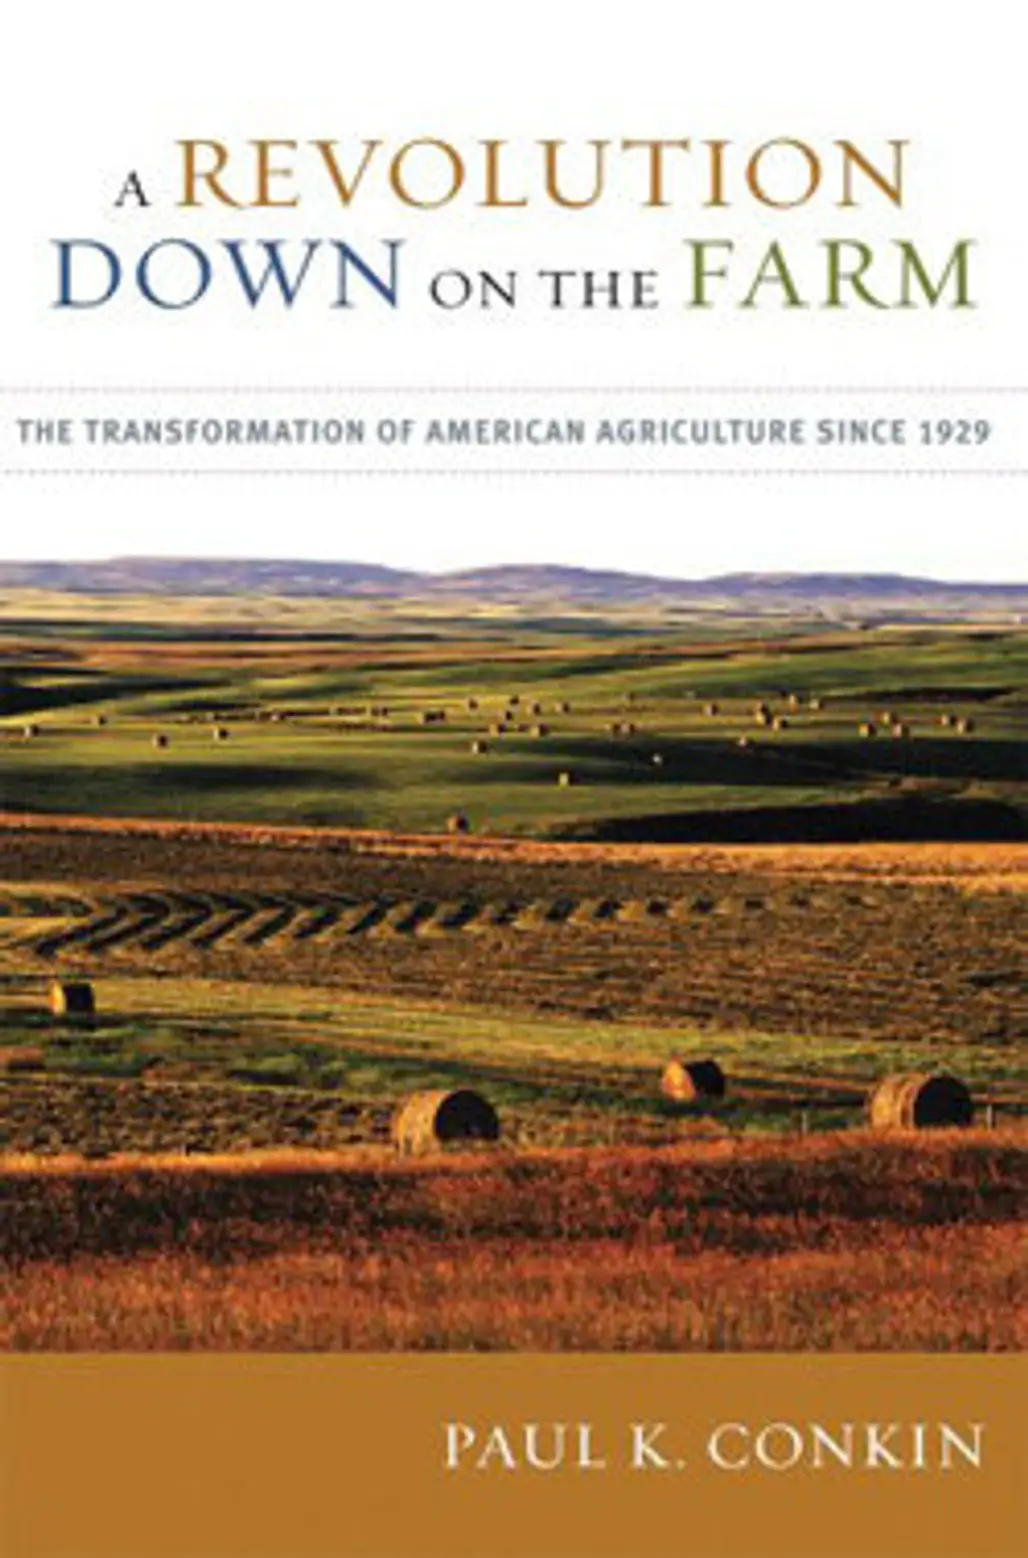 A Revolution down on the Farm: the Transformation of American Agriculture since 1929 by Paul Conkin